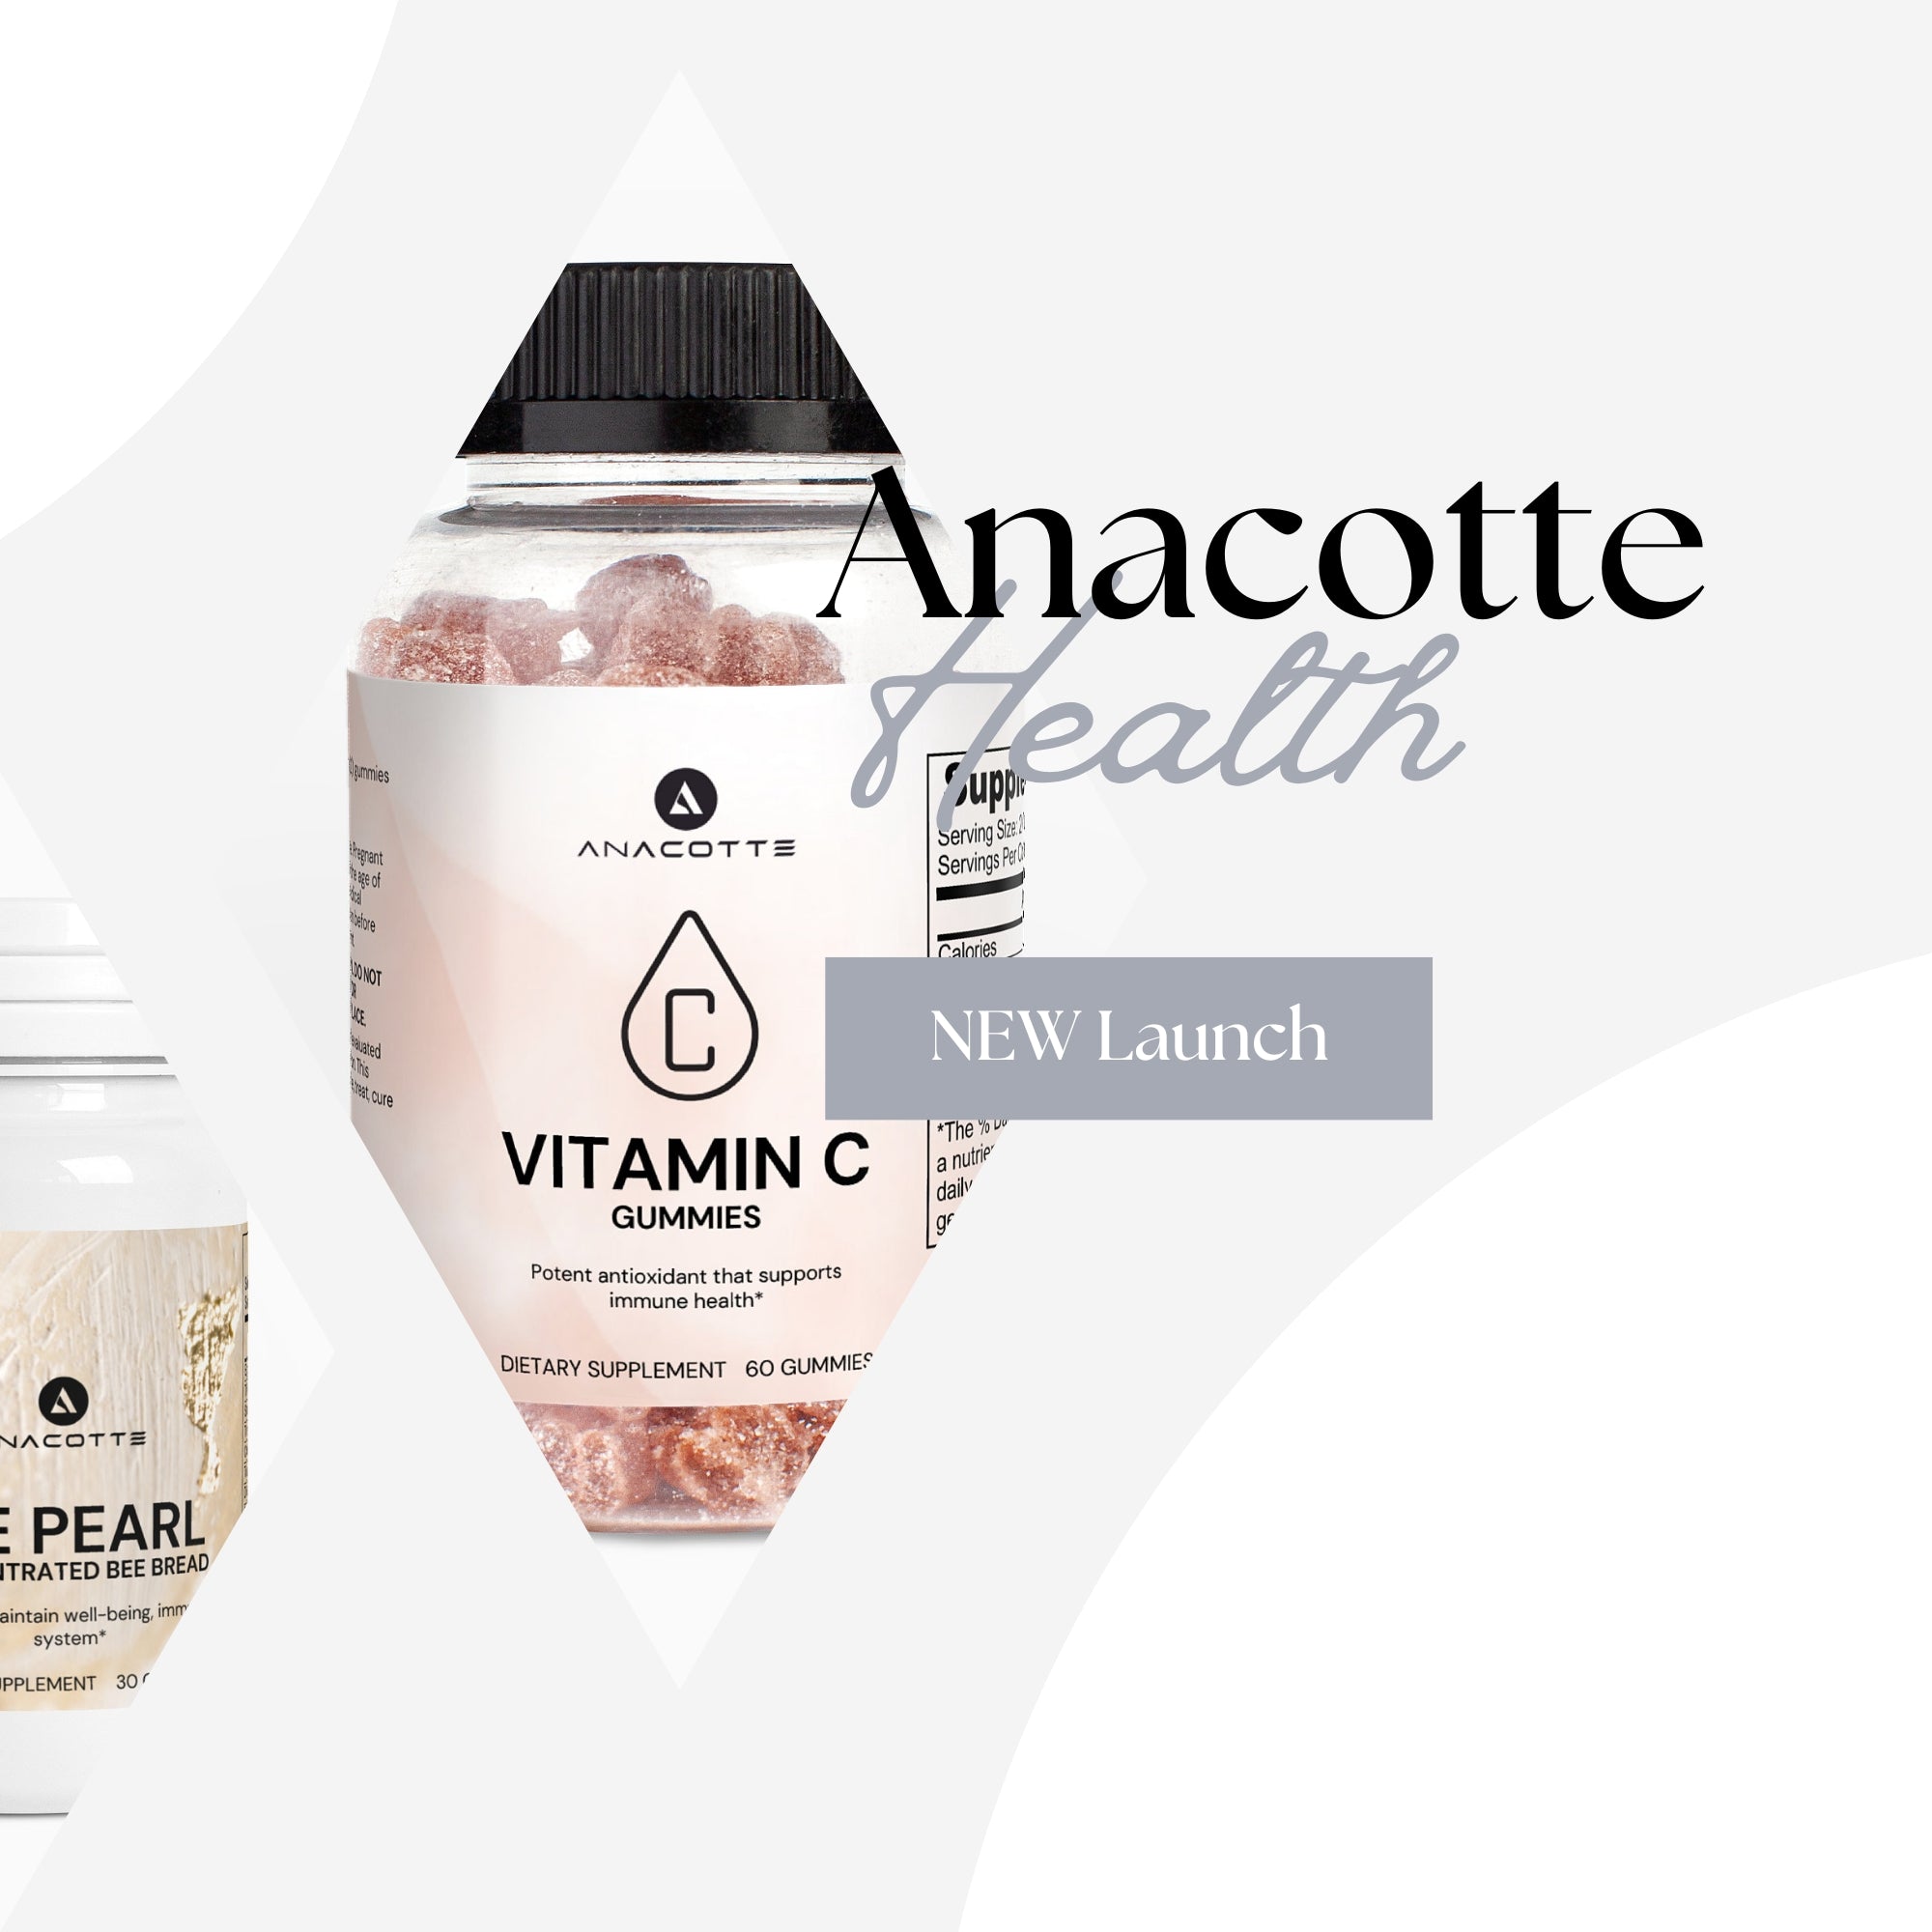 Introducing Anacotte Health